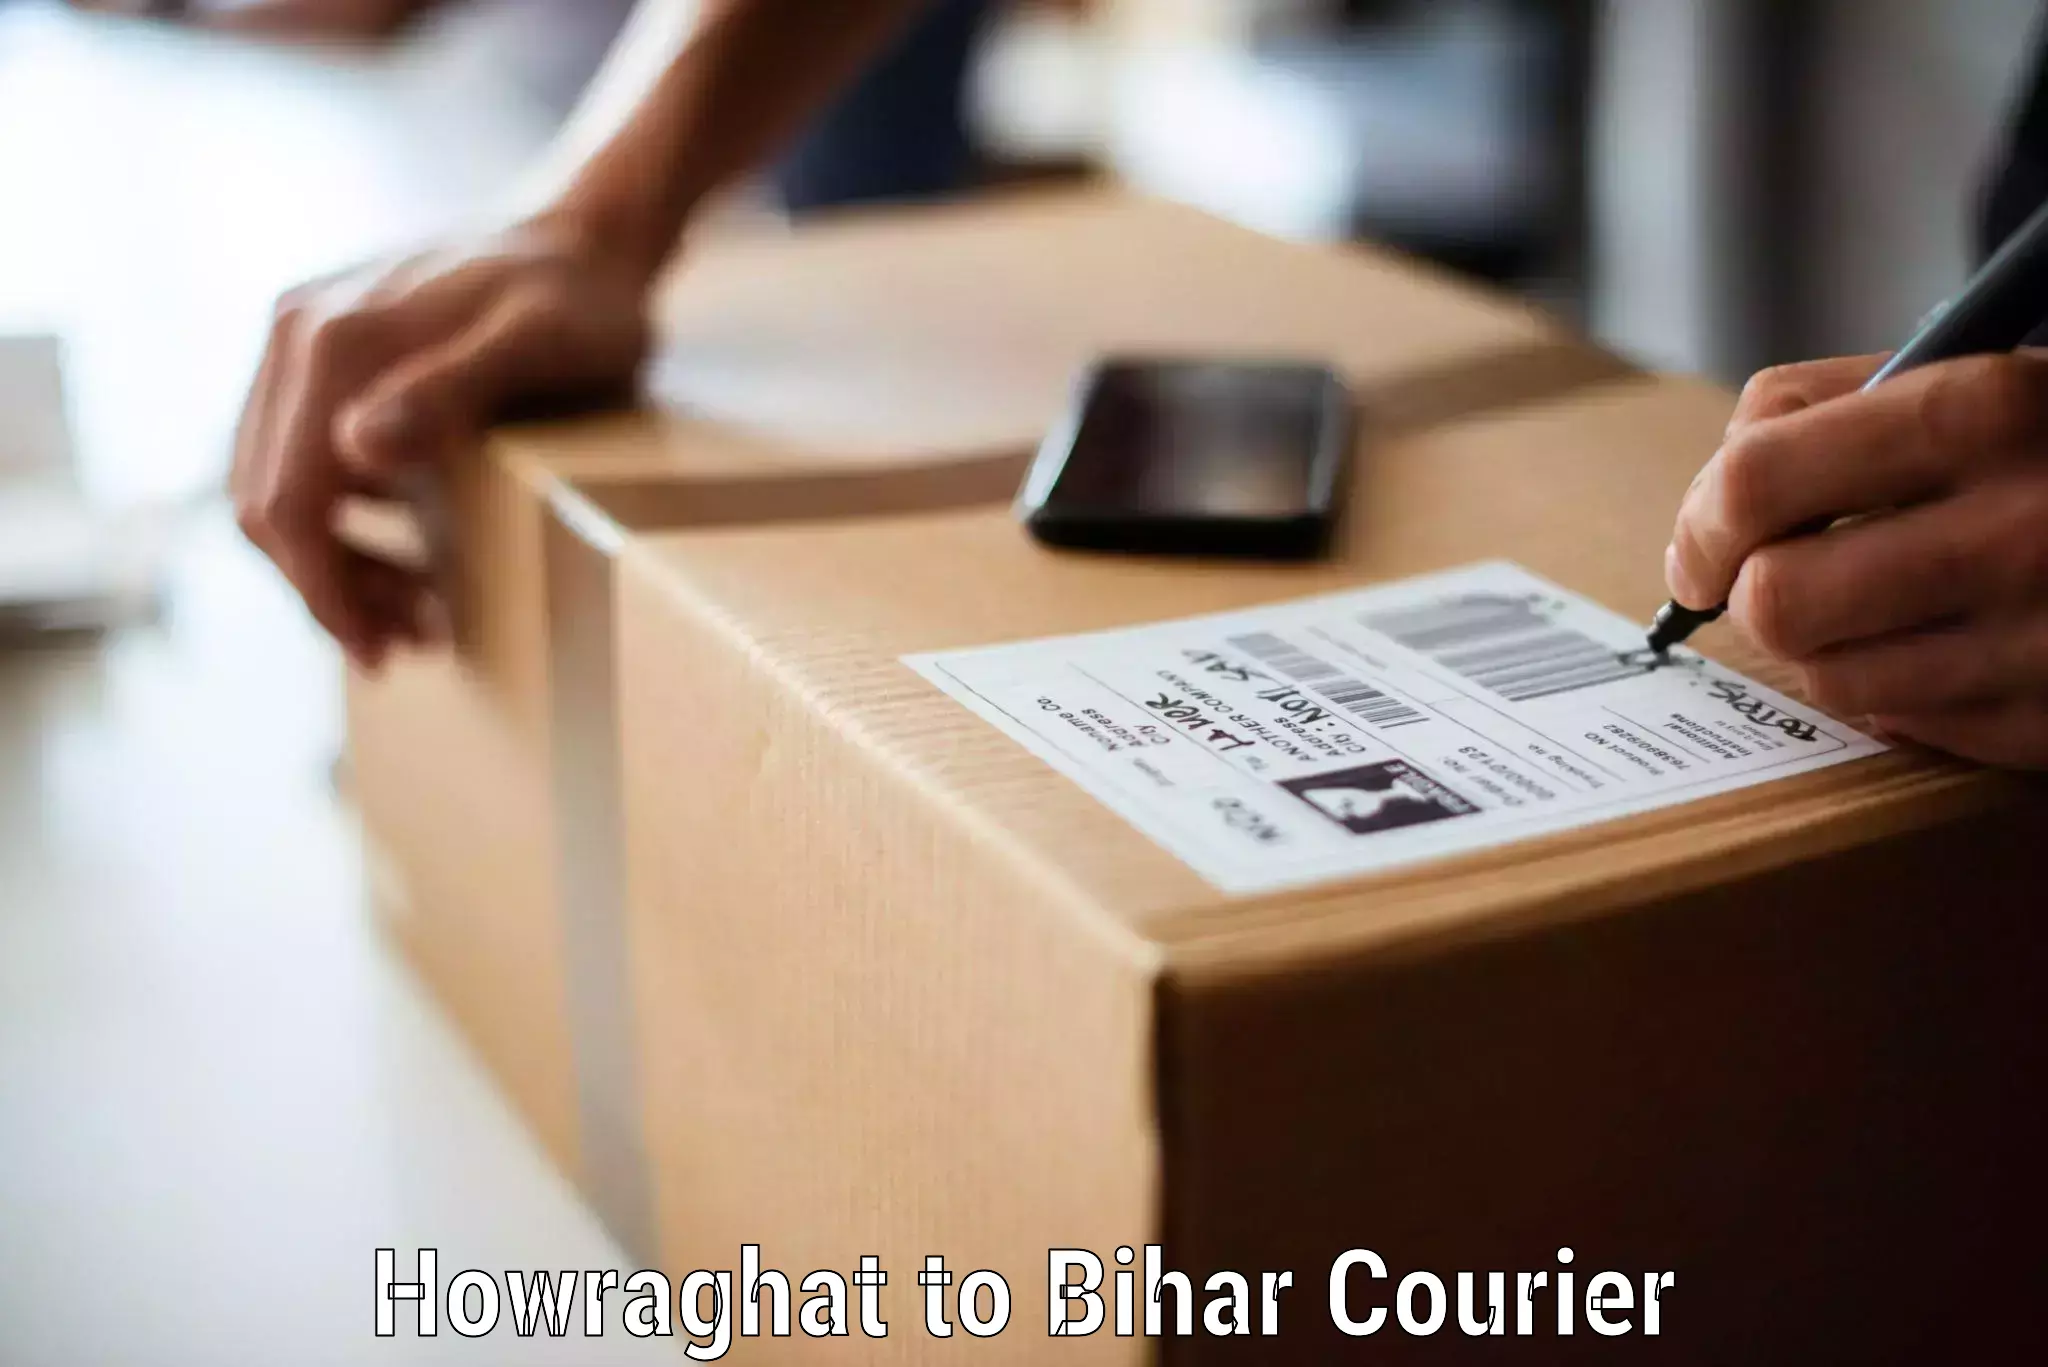 Furniture delivery service Howraghat to Sherghati